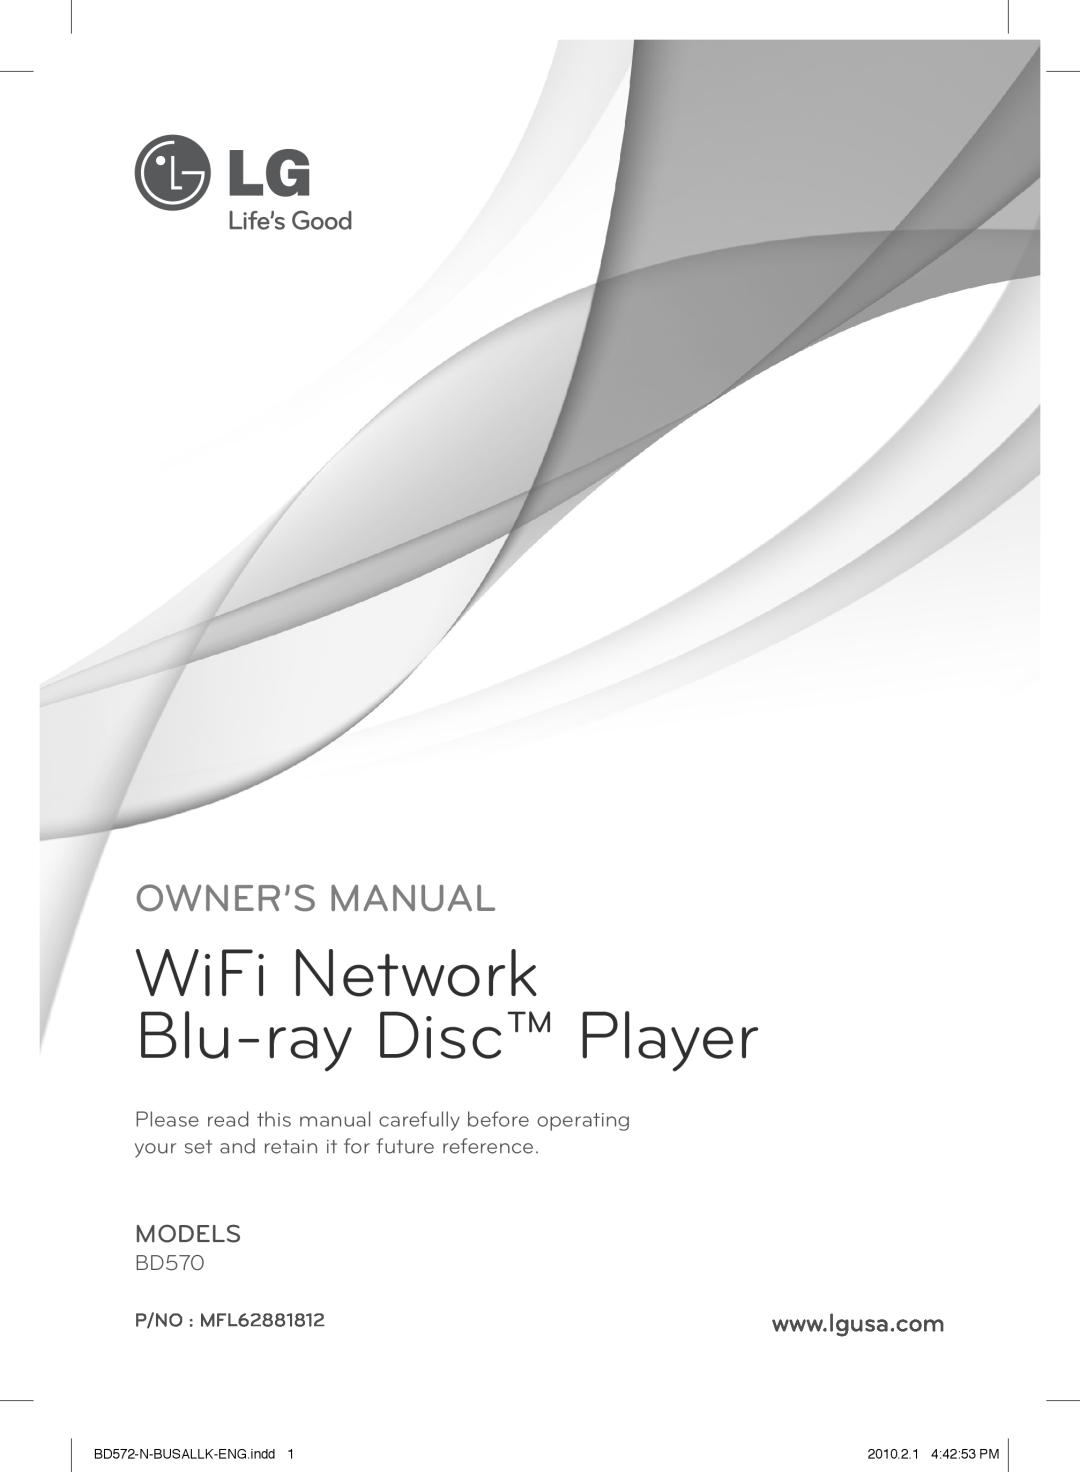 LG Electronics BD570 owner manual WiFi Network Blu-ray Disc Player, Owner’S Manual, Models, P/NO MFL62881812 